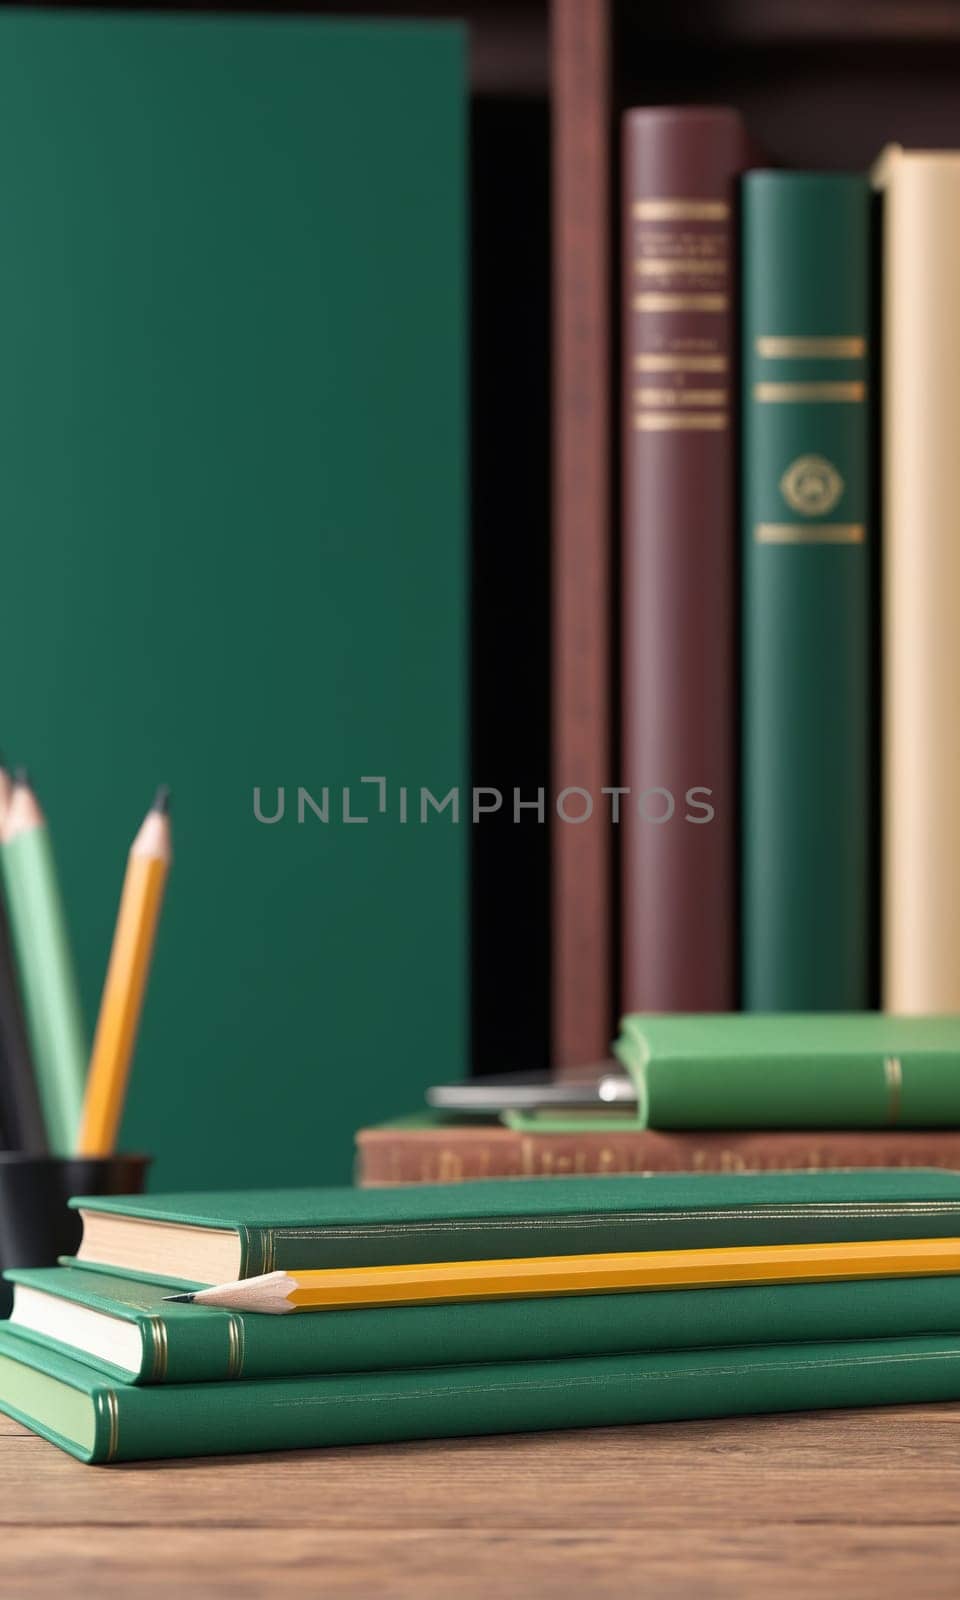 Pencils and notebooks on wooden table against green chalkboard background by Andre1ns